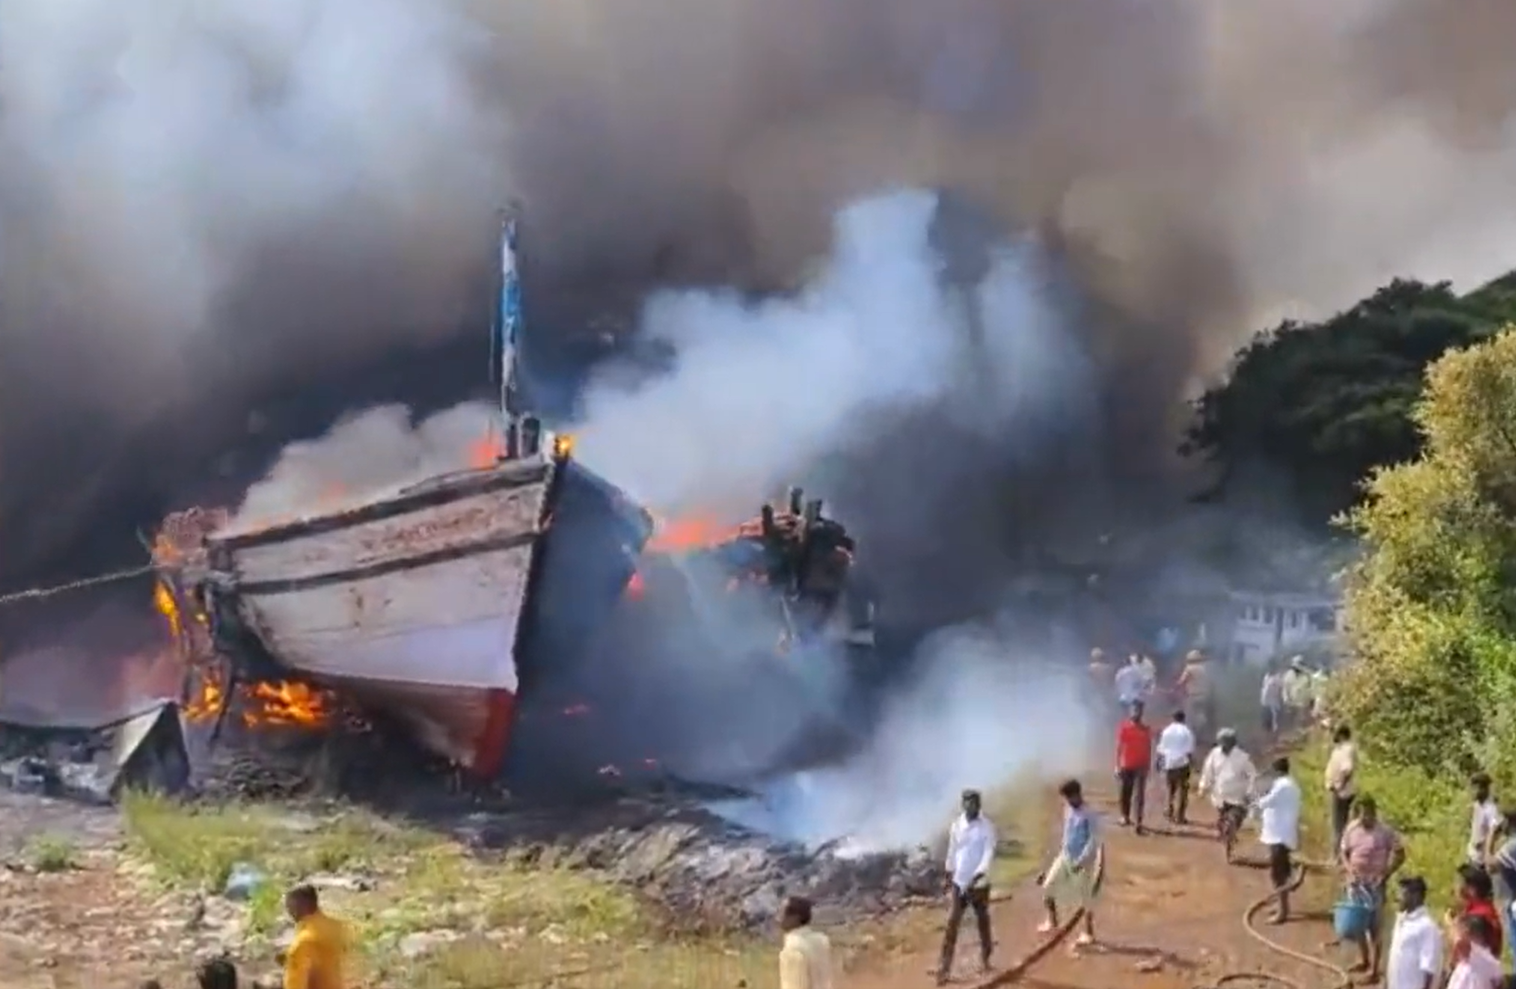 Boats catch fire in Udupi